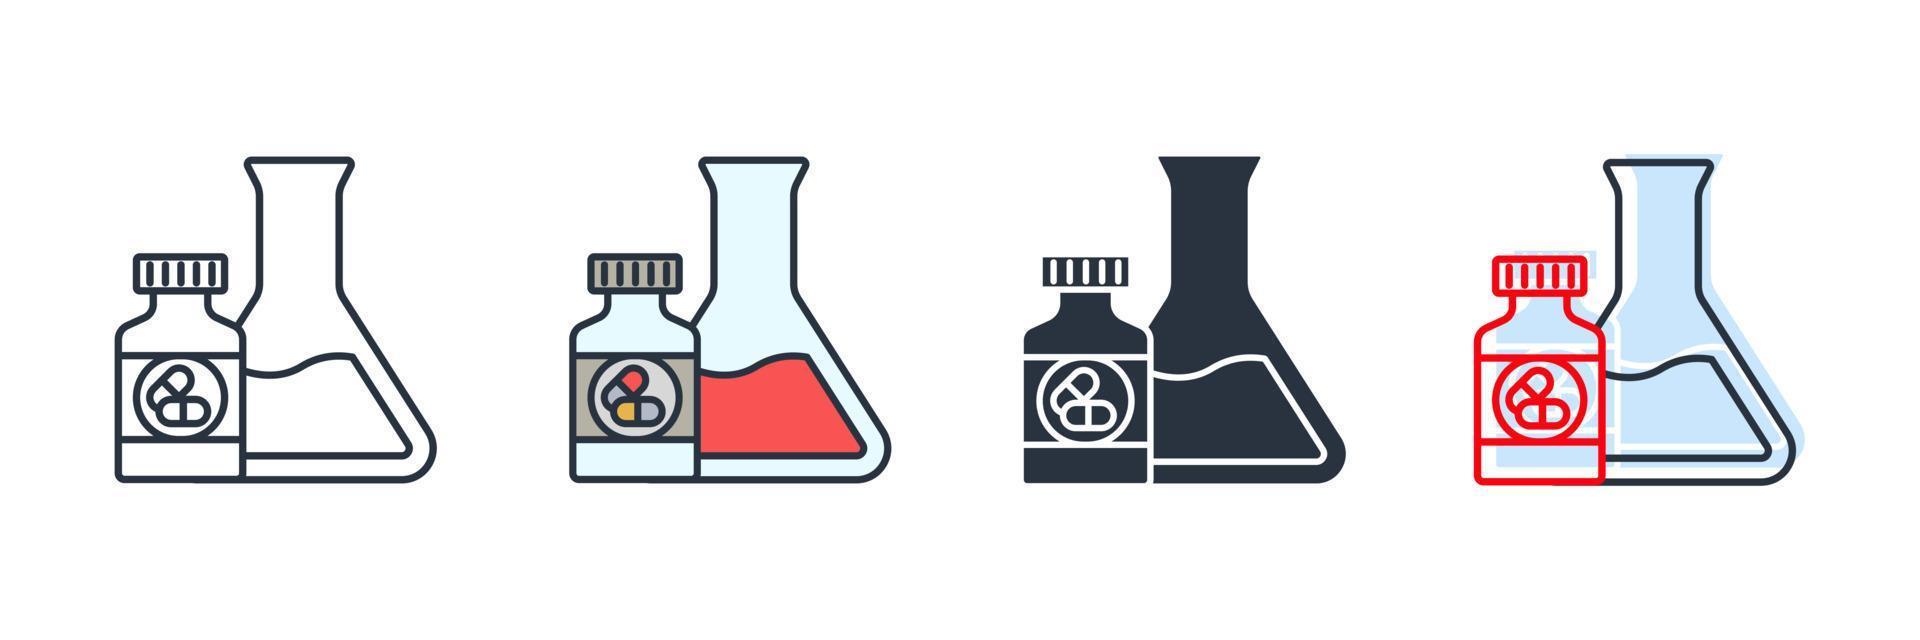 pharmacology icon logo vector illustration. test tube and bottle pill symbol template for graphic and web design collection